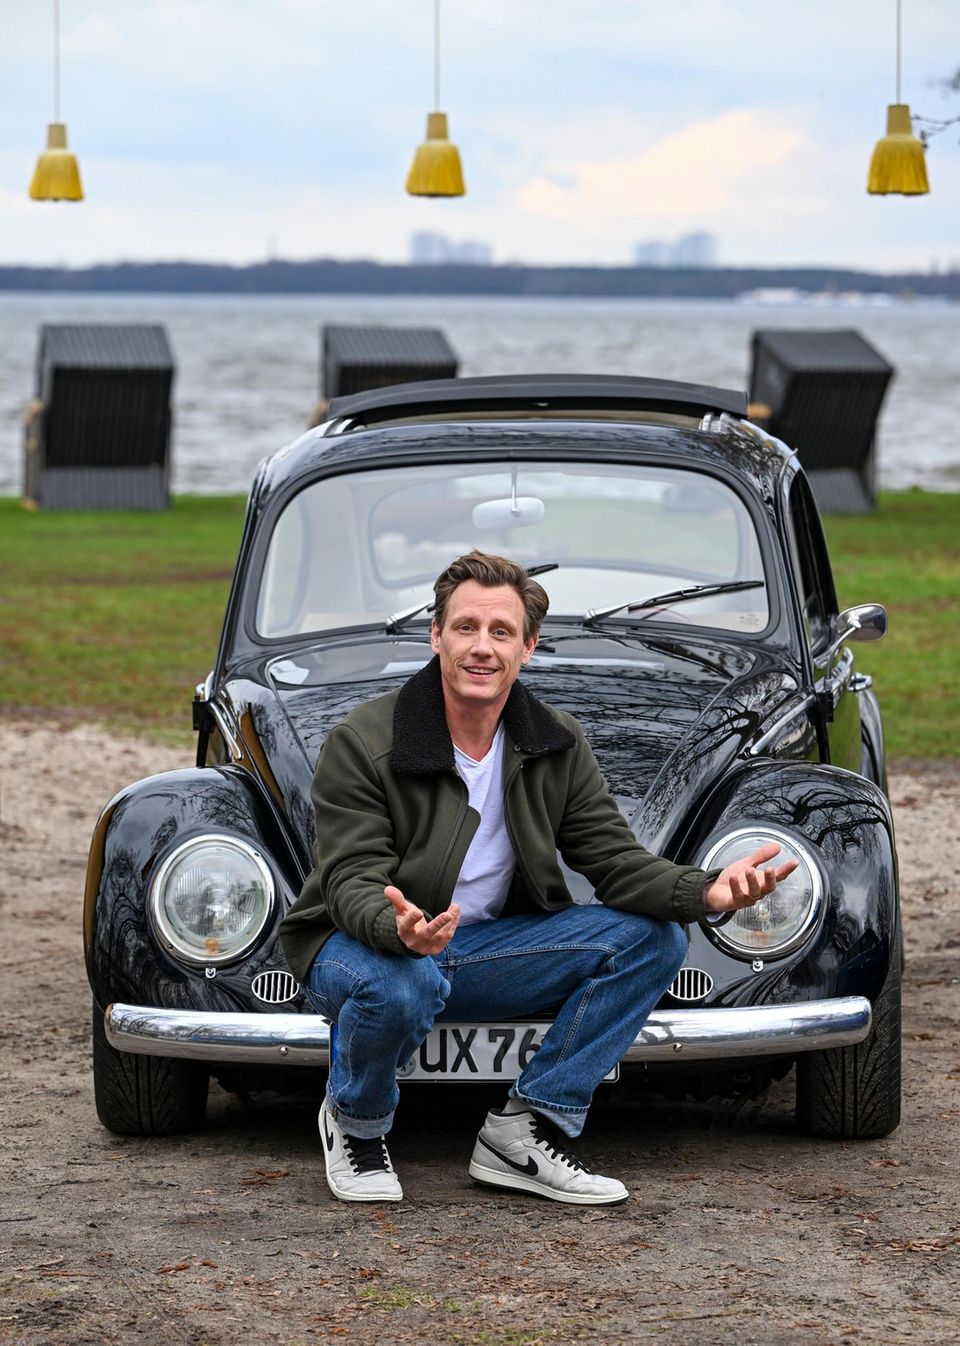 Patrick Kalupa in front of his VW Beetle